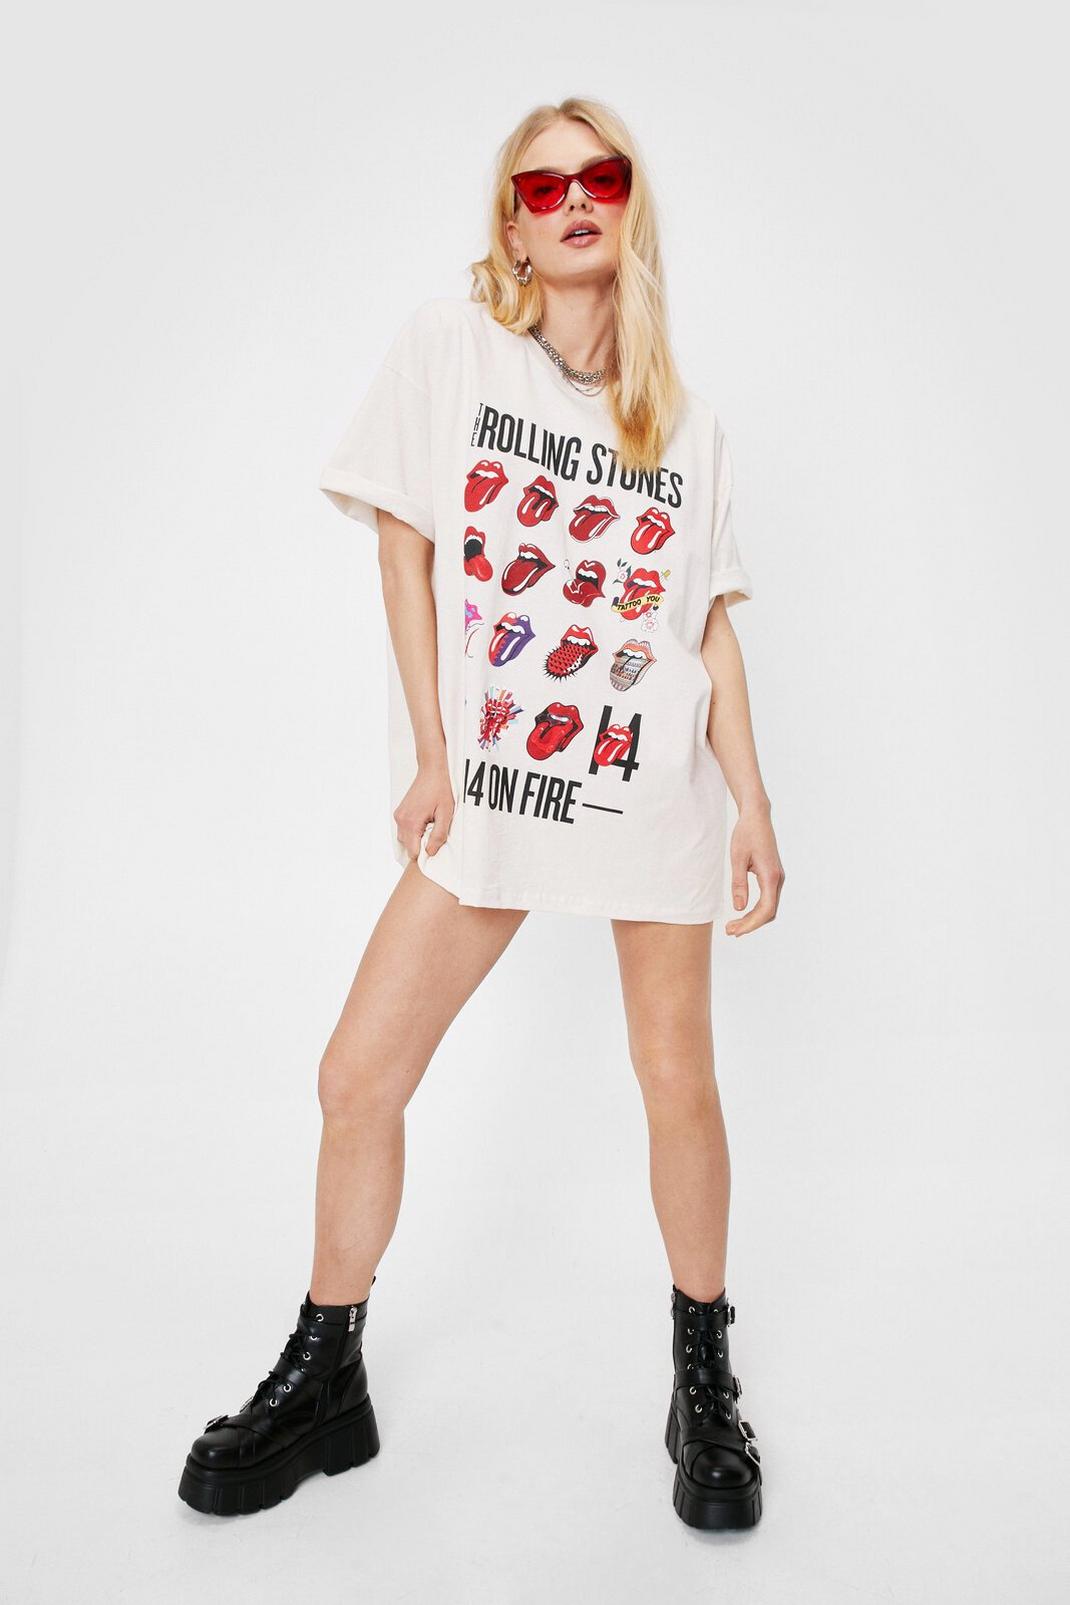 Natural Rolling Stones 14 On Fire Band T-Shirt Dress image number 1